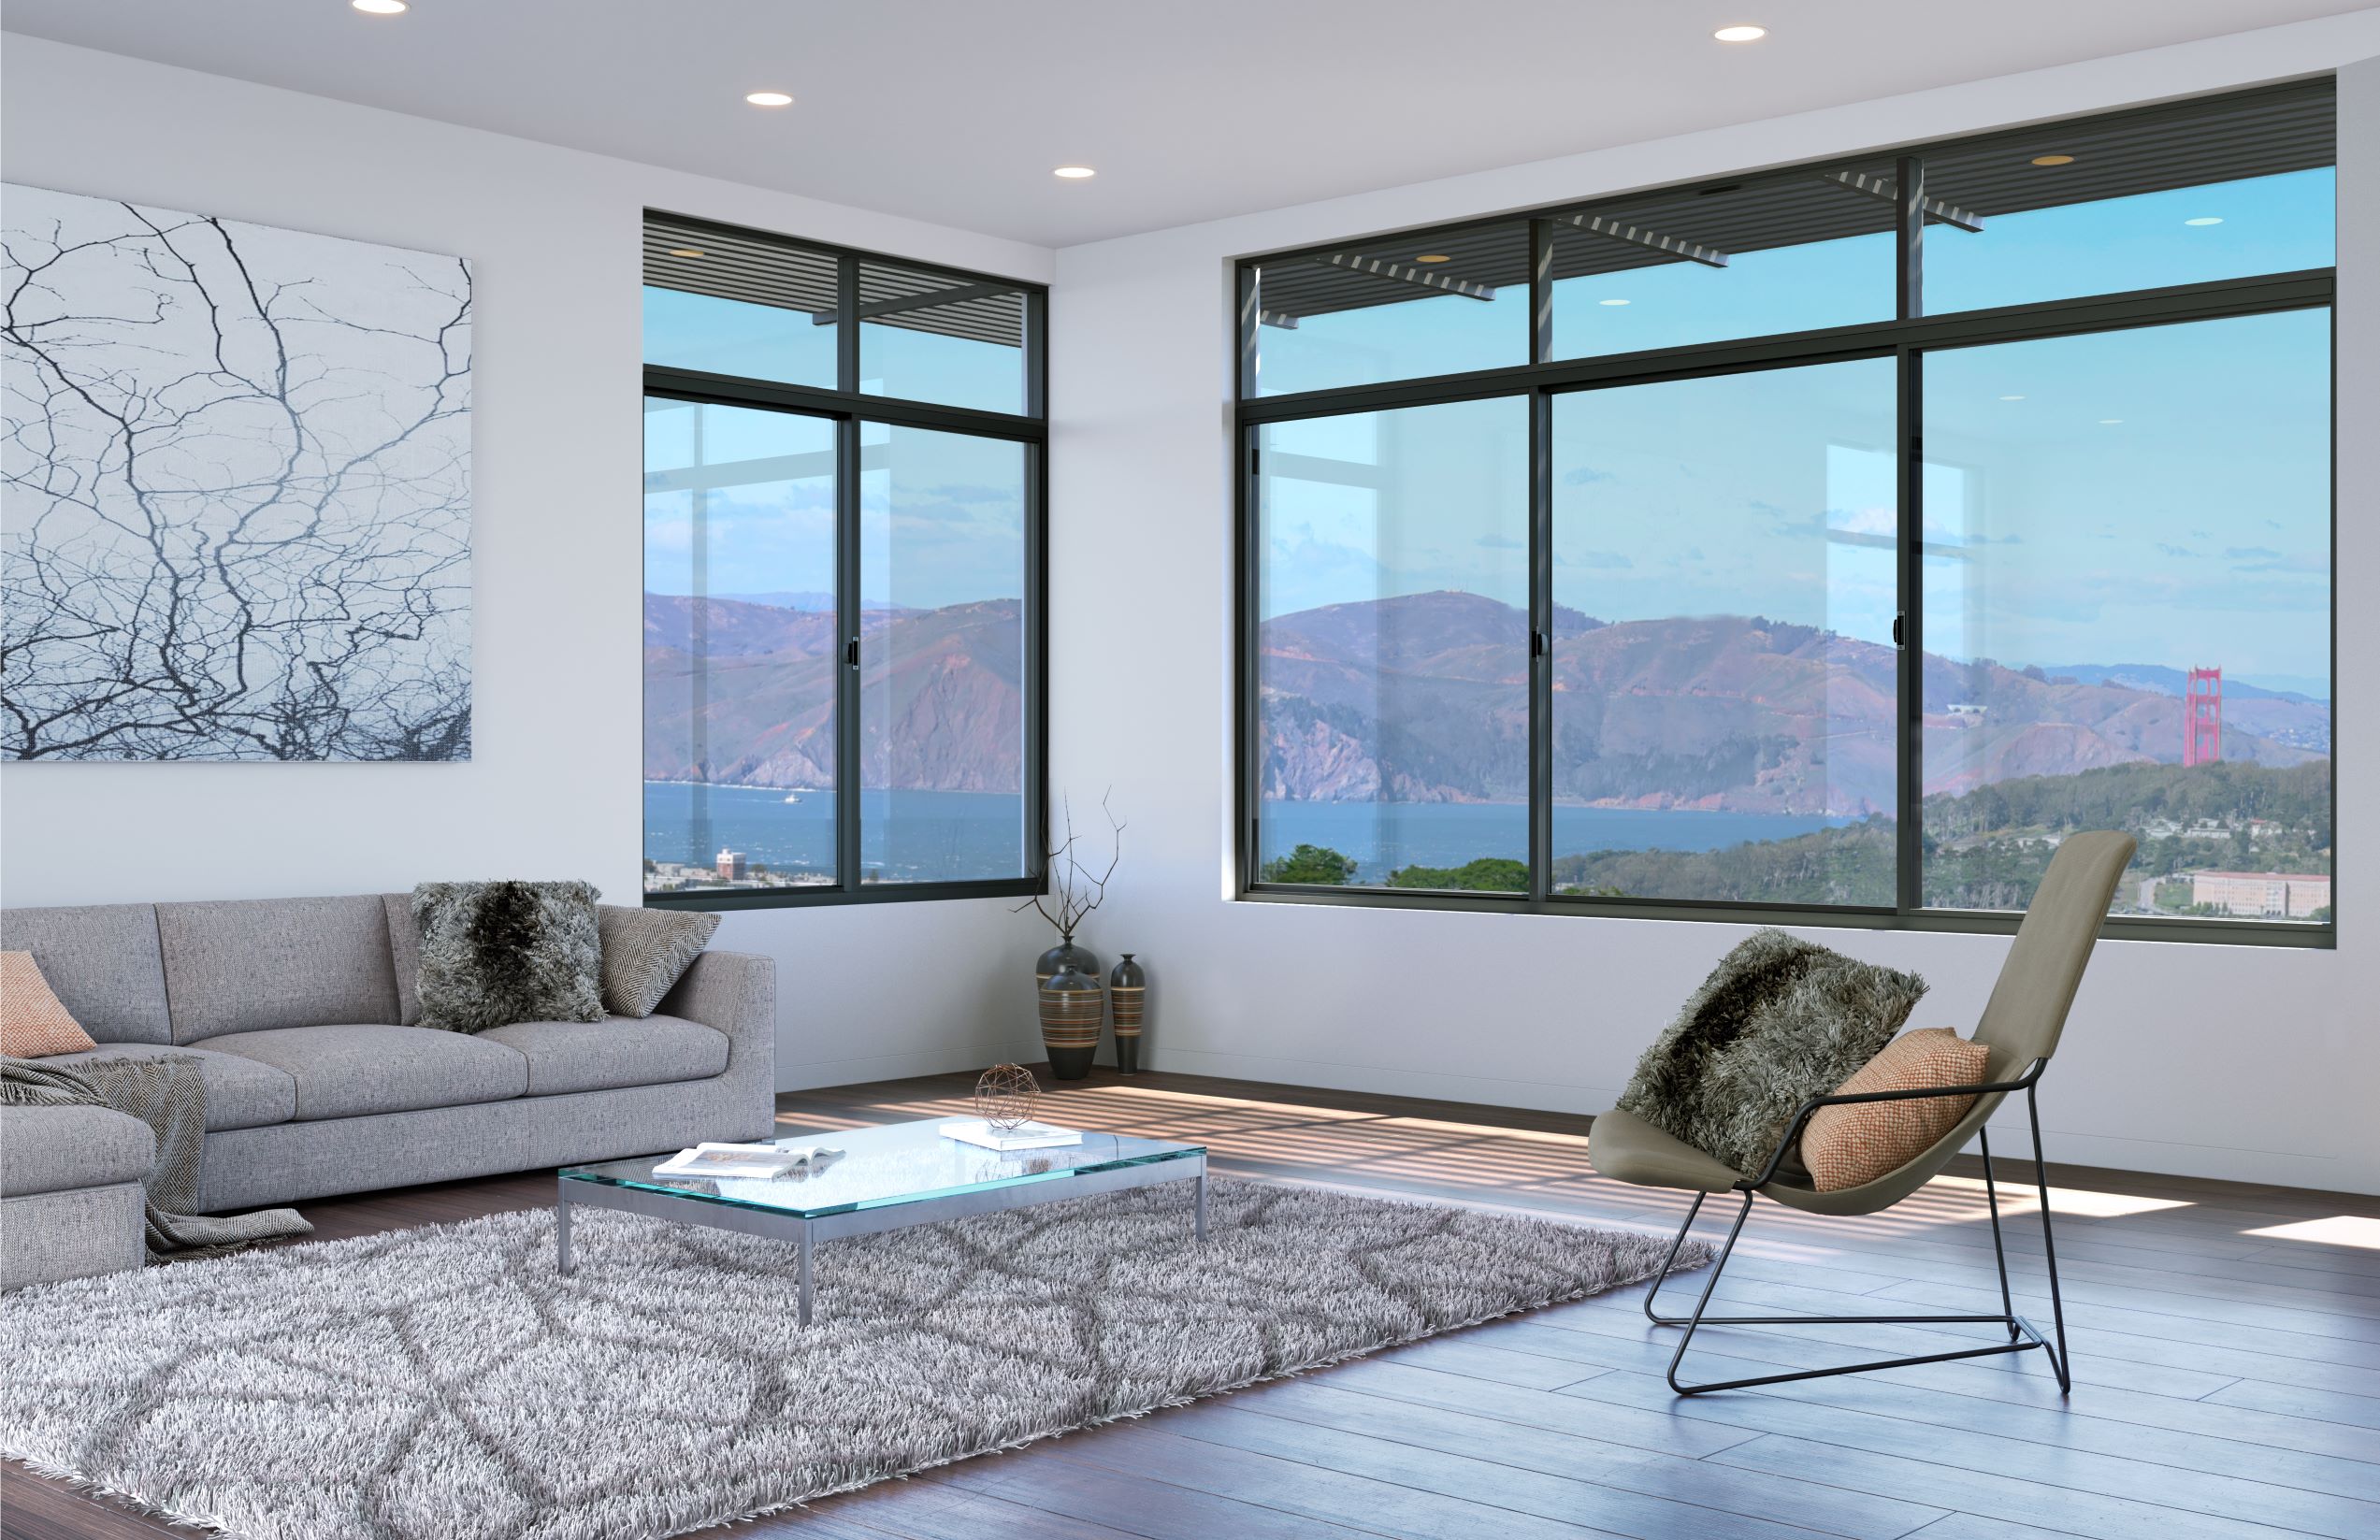 Modern living room with large windows offering a scenic view of hills and a distant bridge. The room features a gray sofa, a glass coffee table, a shag rug, and a modern chair with cushions.